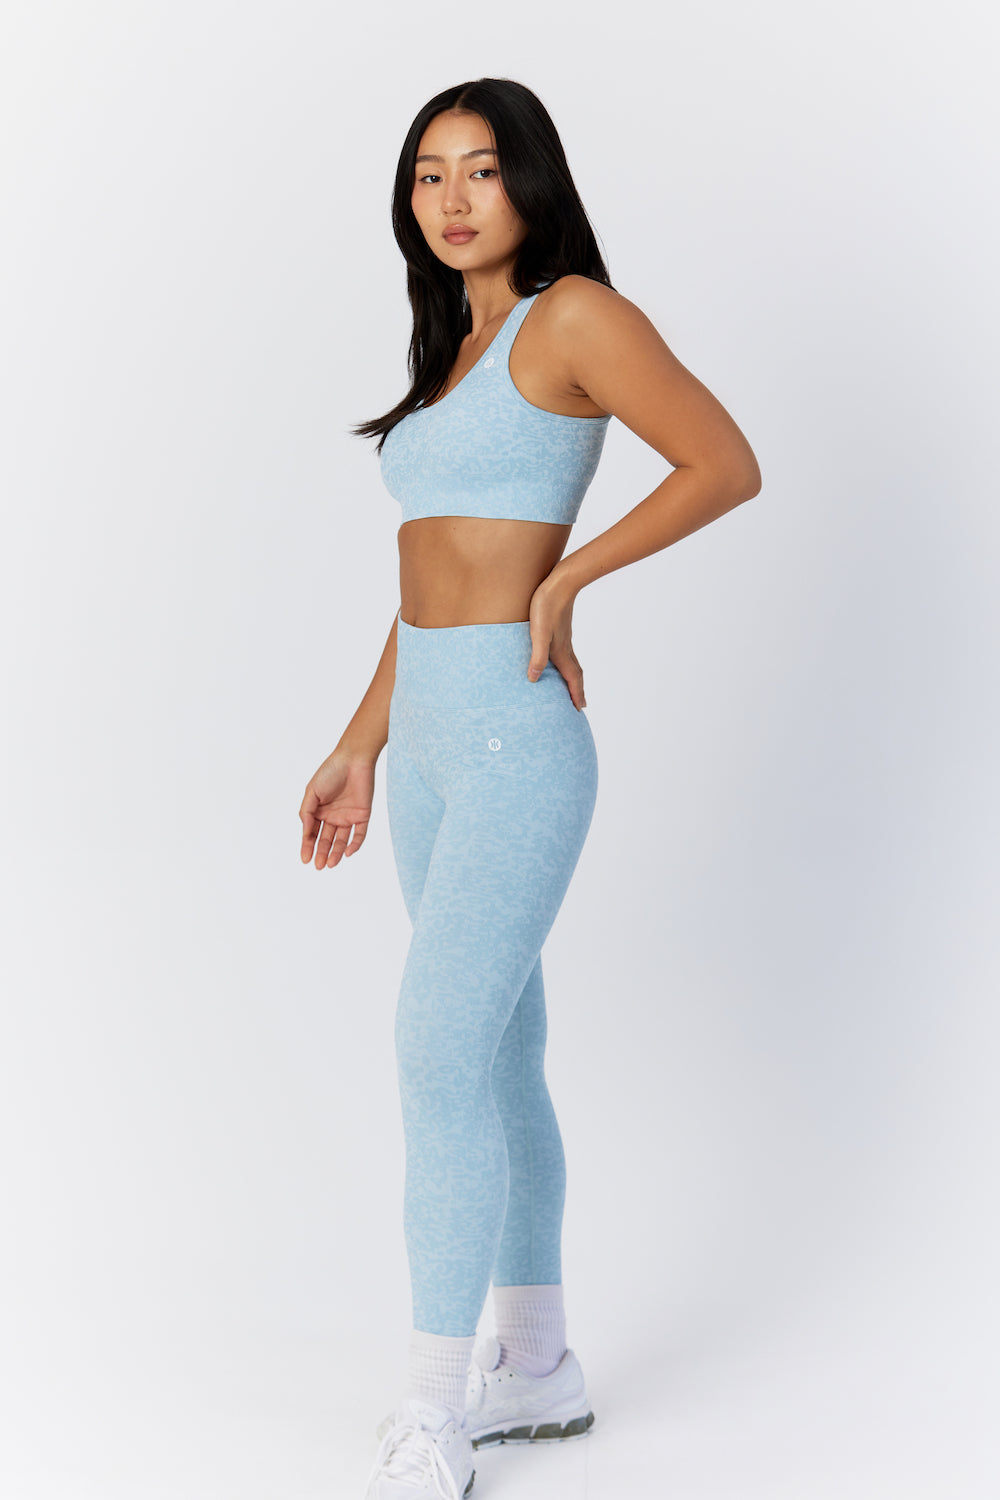 Astoria Activewear - Discover our best-selling Seamless ENERGY line - also  available in pink and orange at www.astoria-activewear.com 🌟